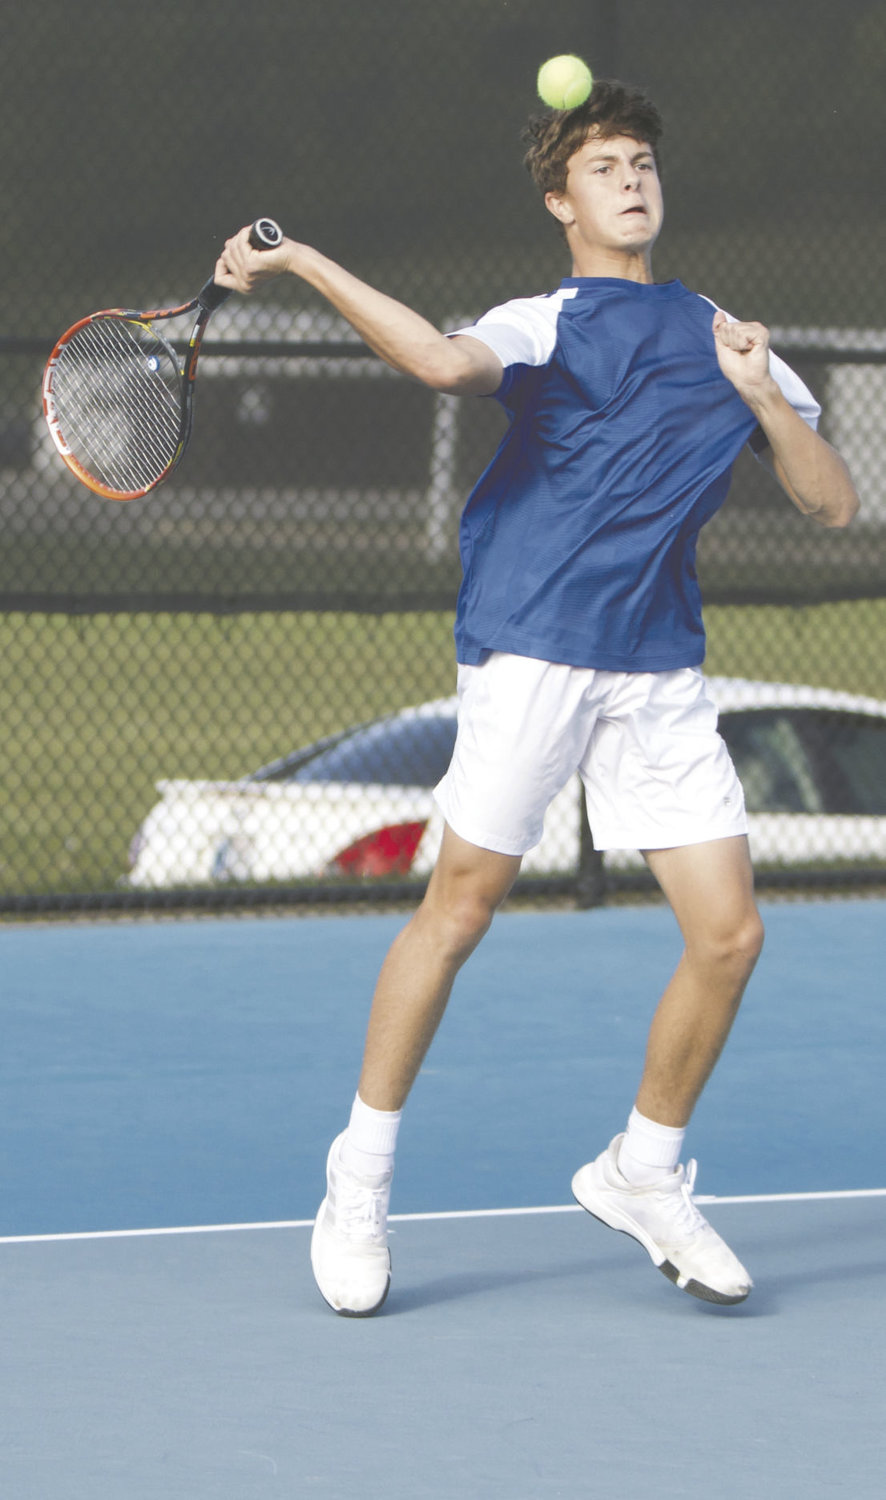 Crawfordsville sophomore Austin Motz saw his season come to an end with a 6-0, 6-0 loss to Adam Cox.